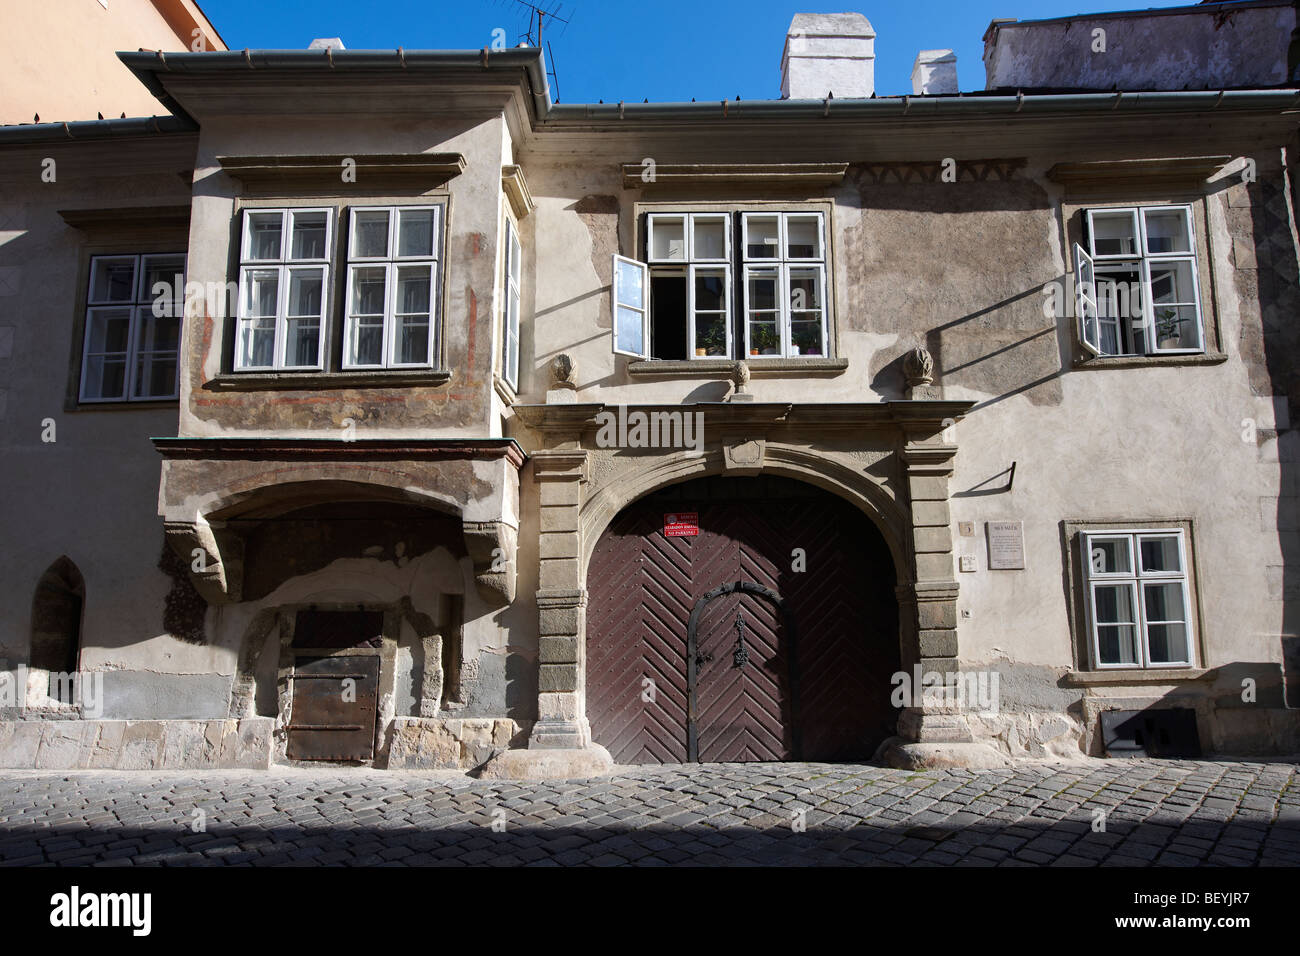 17th century town house with 16th century enclosed balcony and 14th century ground floor windows- Sopron, Hungary Stock Photo